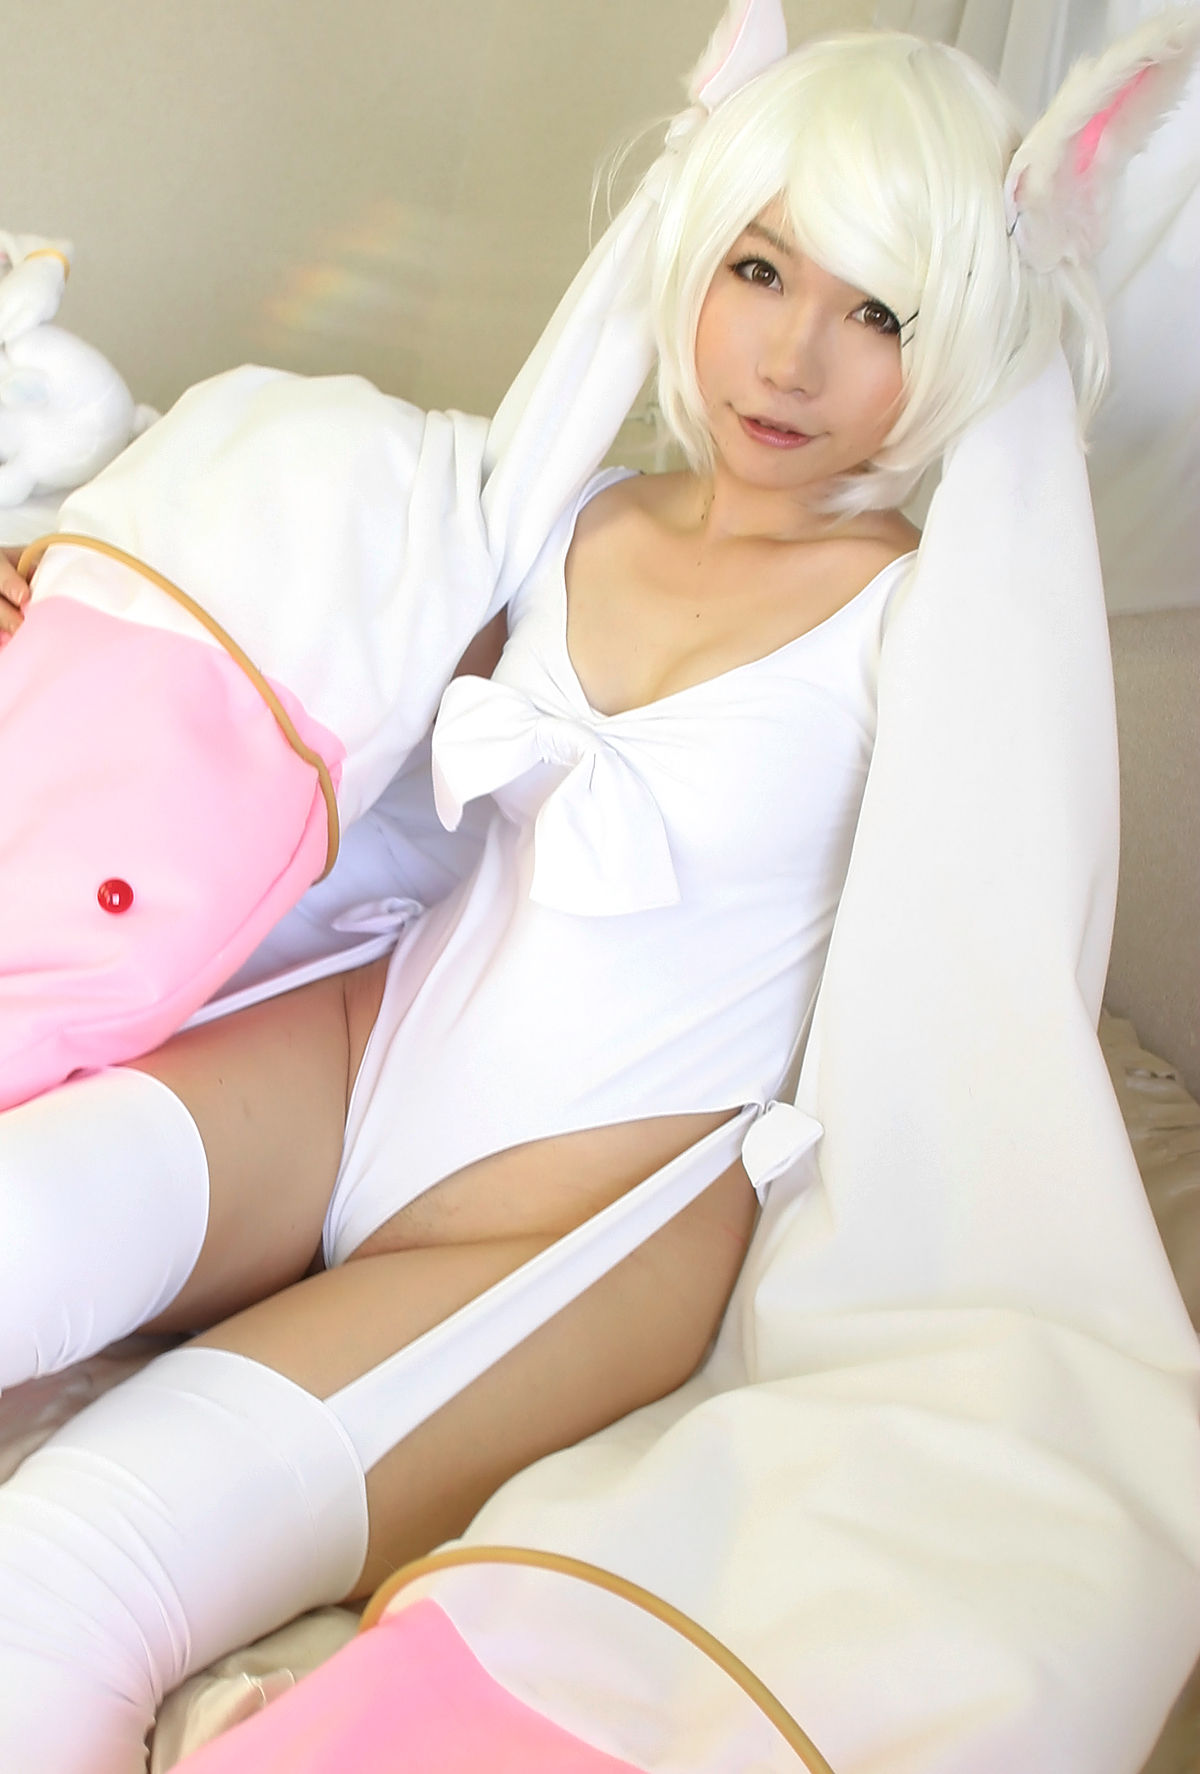 1girl asian cosplay cute female female_only leotard photo pussy real real_person small_breasts socks solo stockings